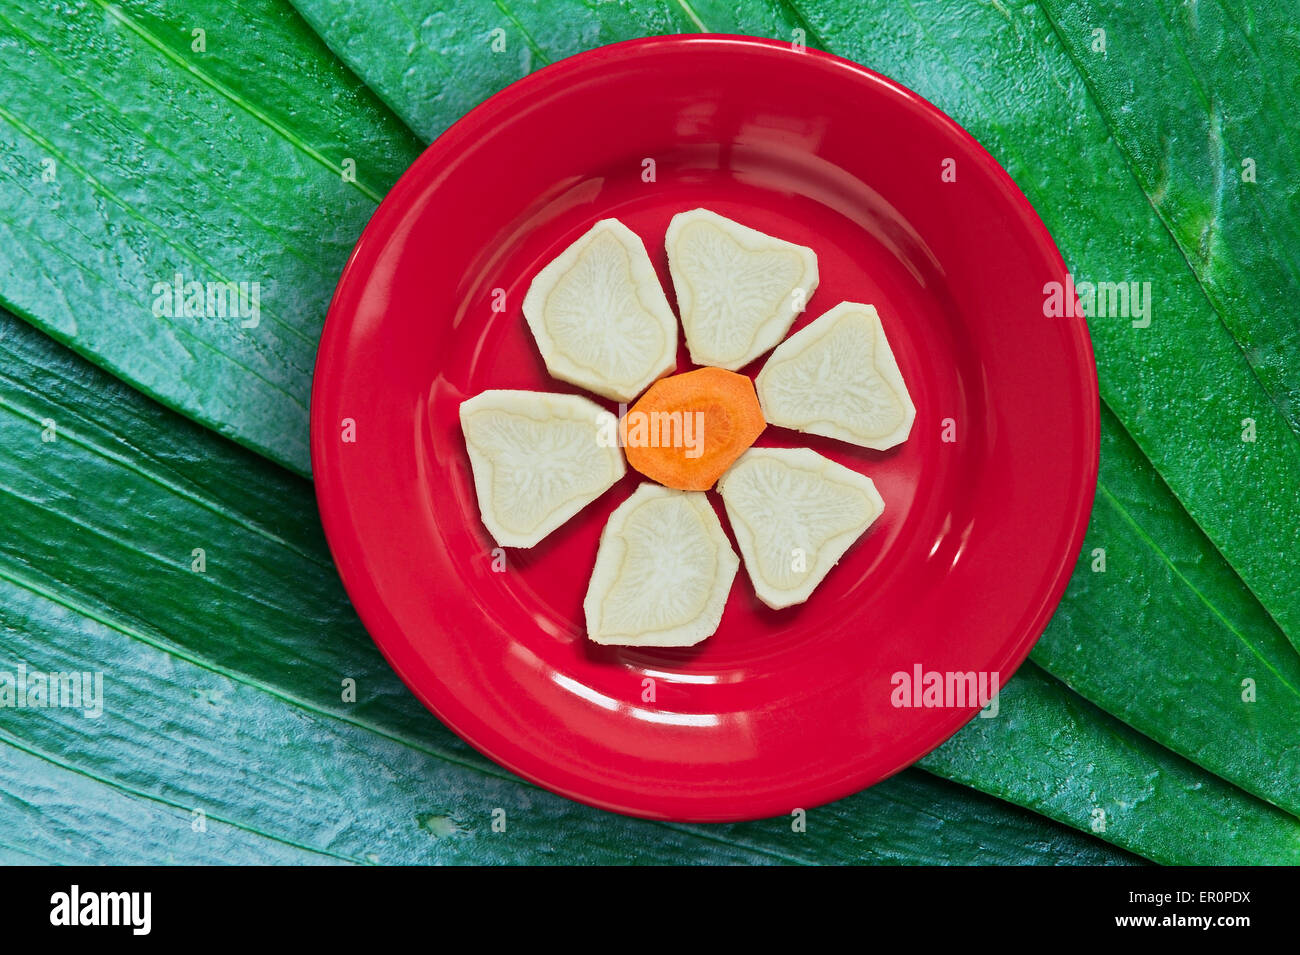 Slices of parsley and carrot arranged in a flower shape, served on red ceramic plate. Diet concept. Organic food. Stock Photo